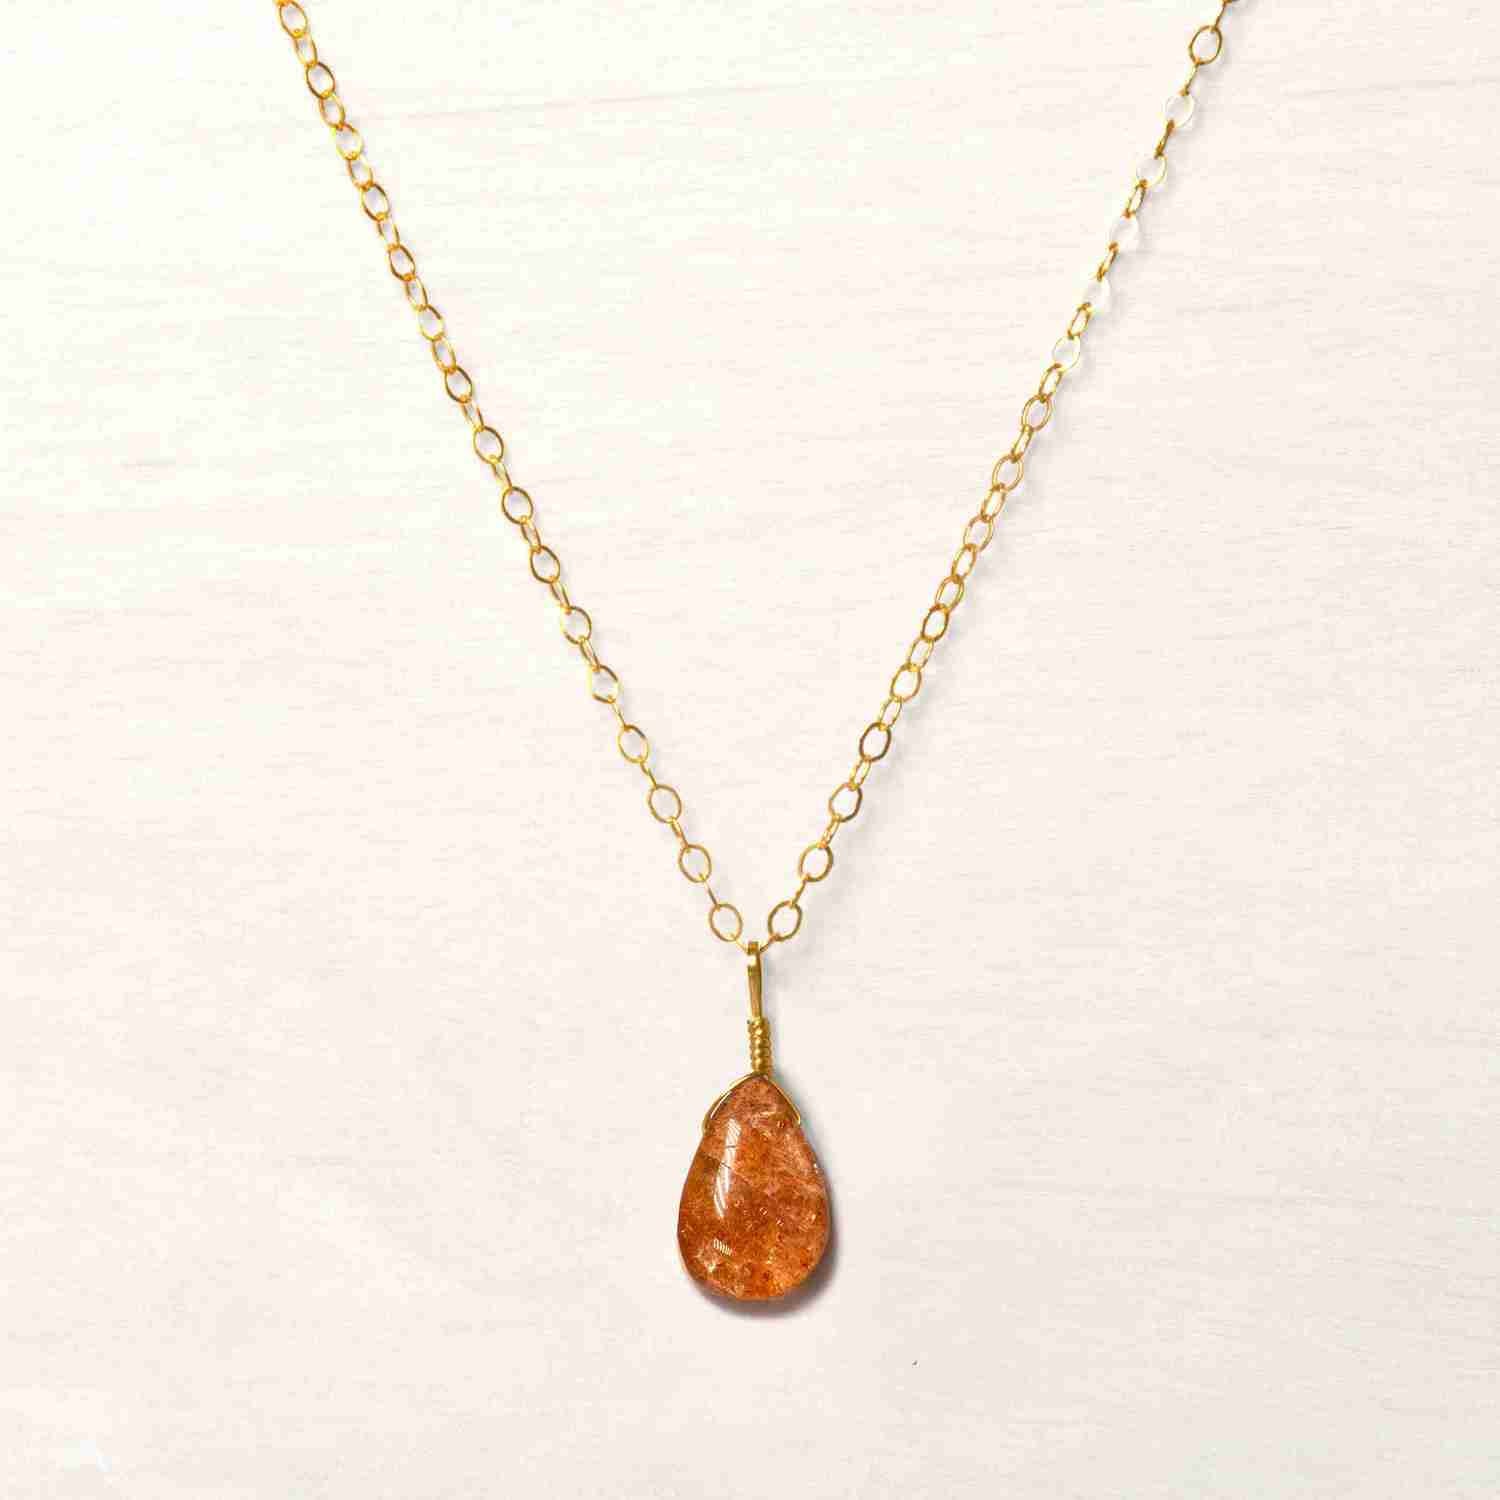 gold necklace chain with sunstone pendant